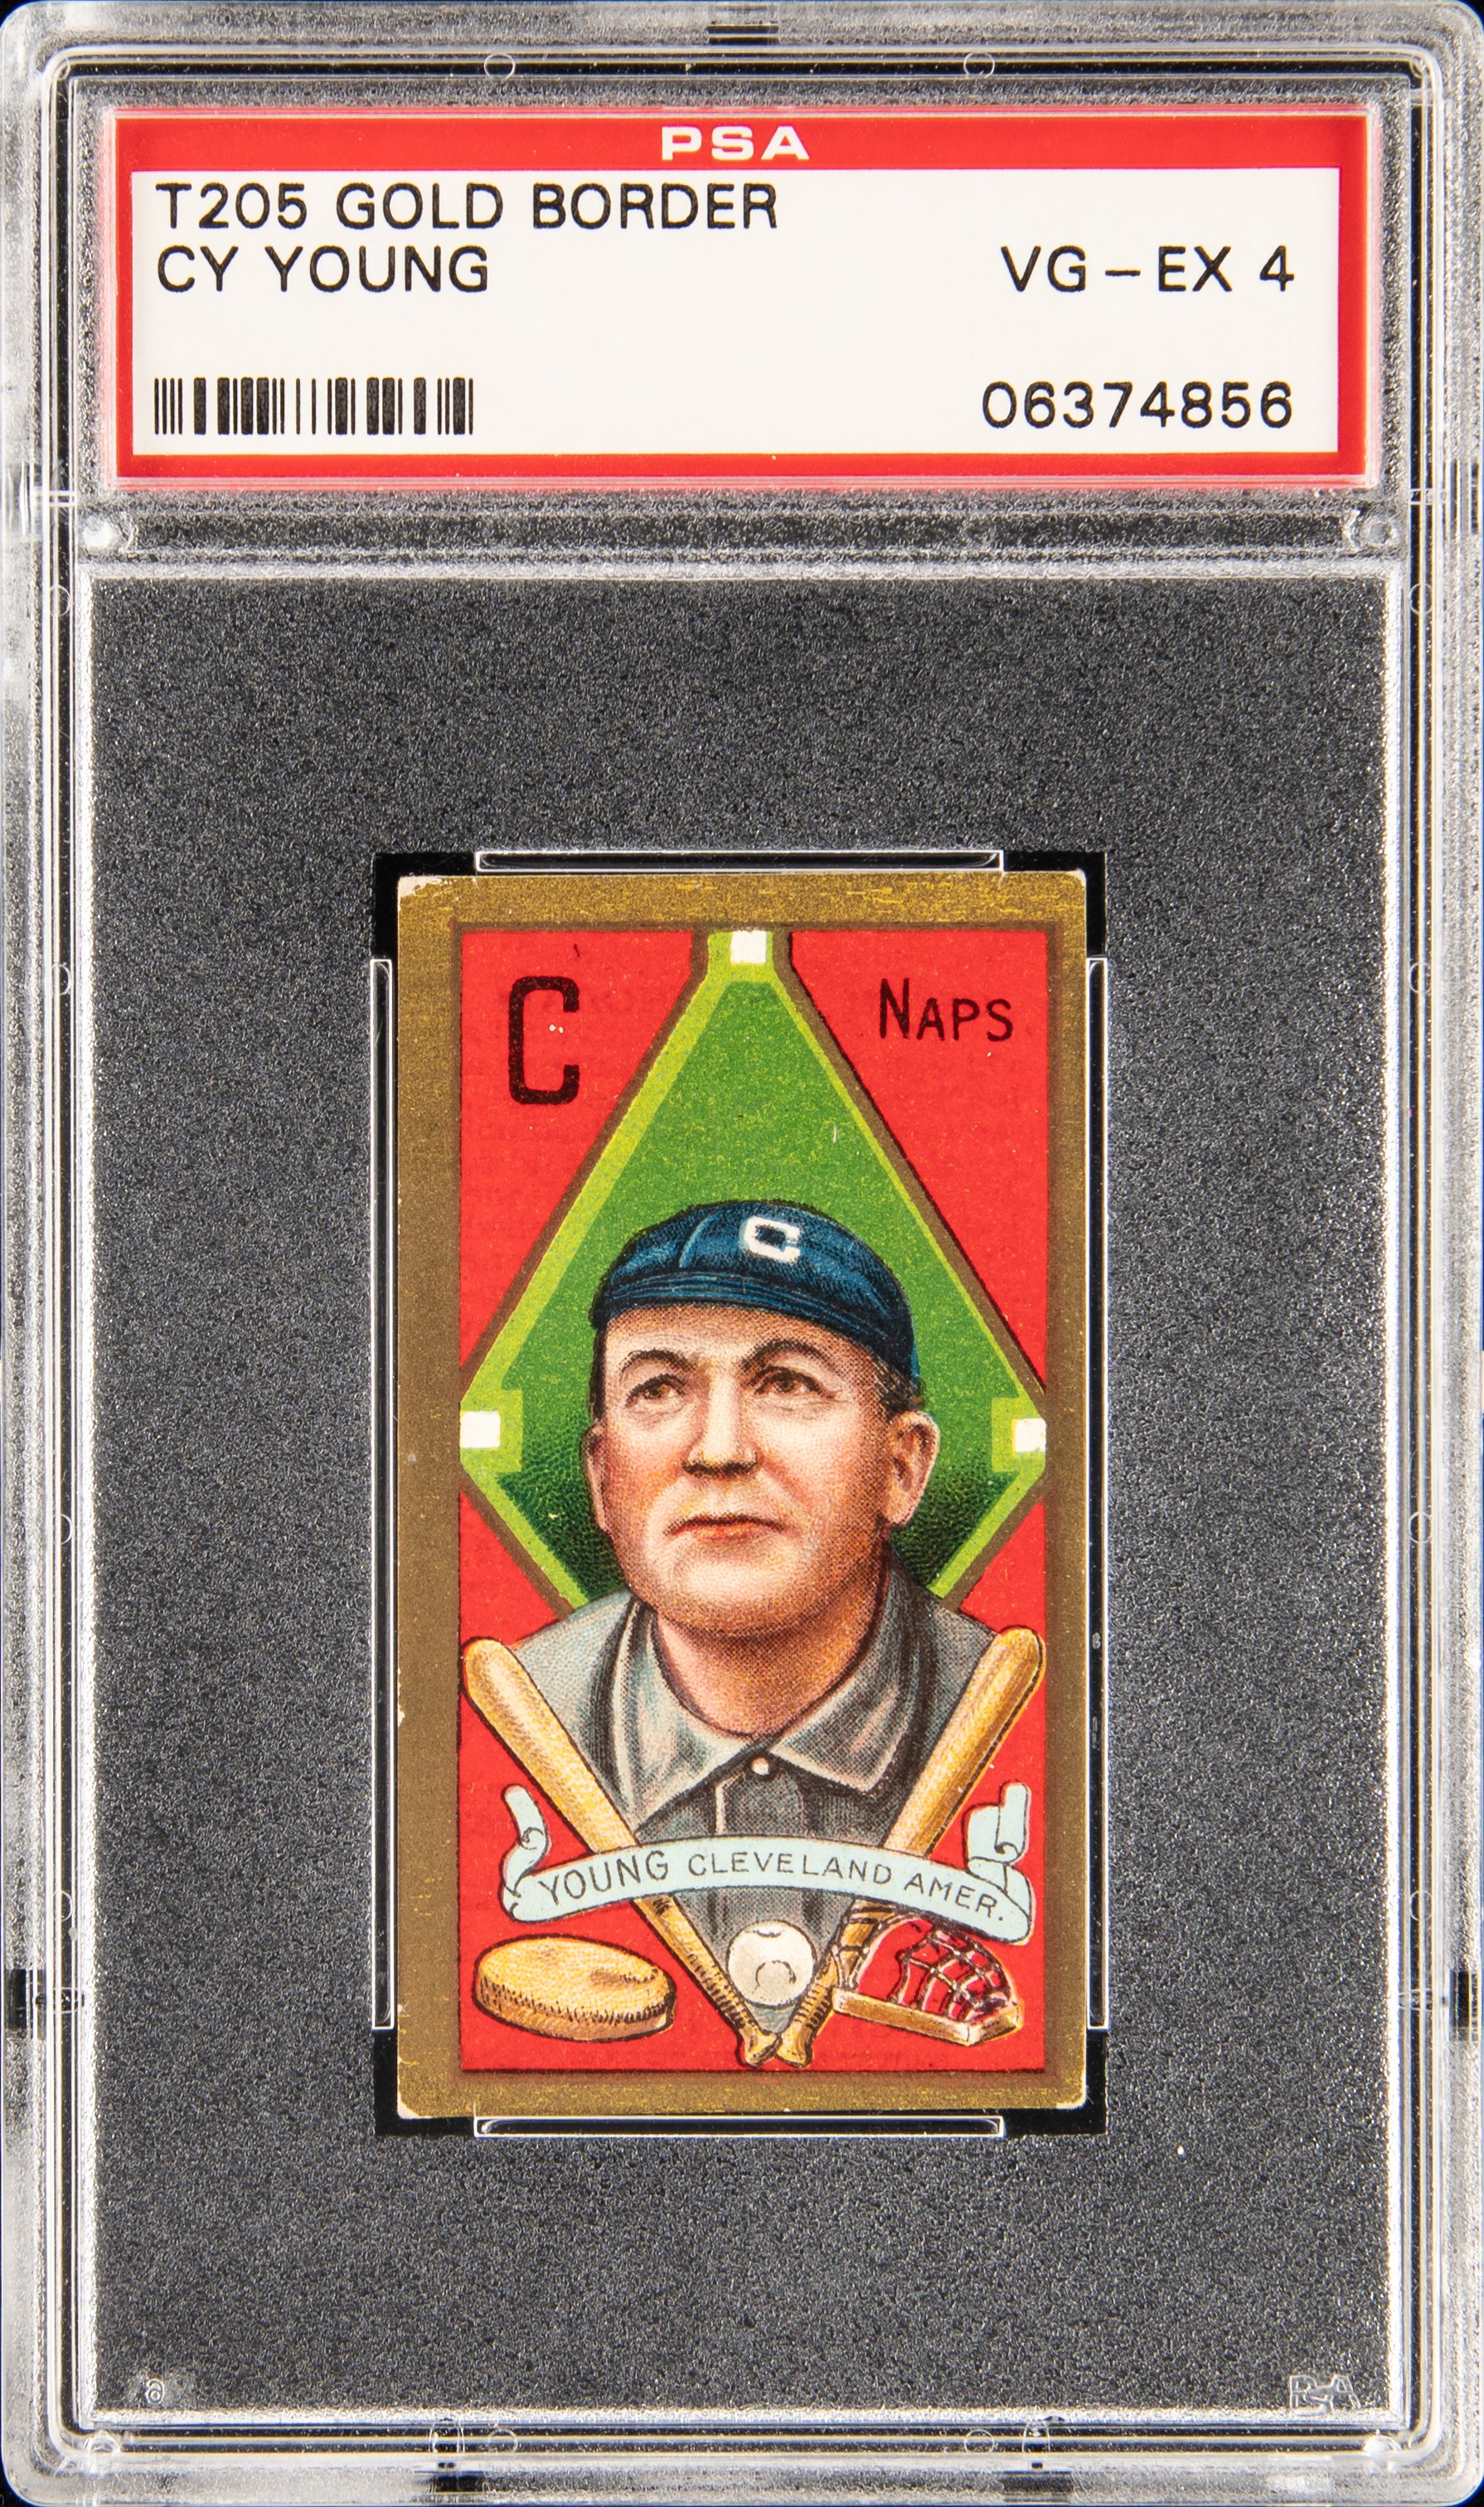 1911 T205 Gold Border Cy Young - PSA VG-EX 4